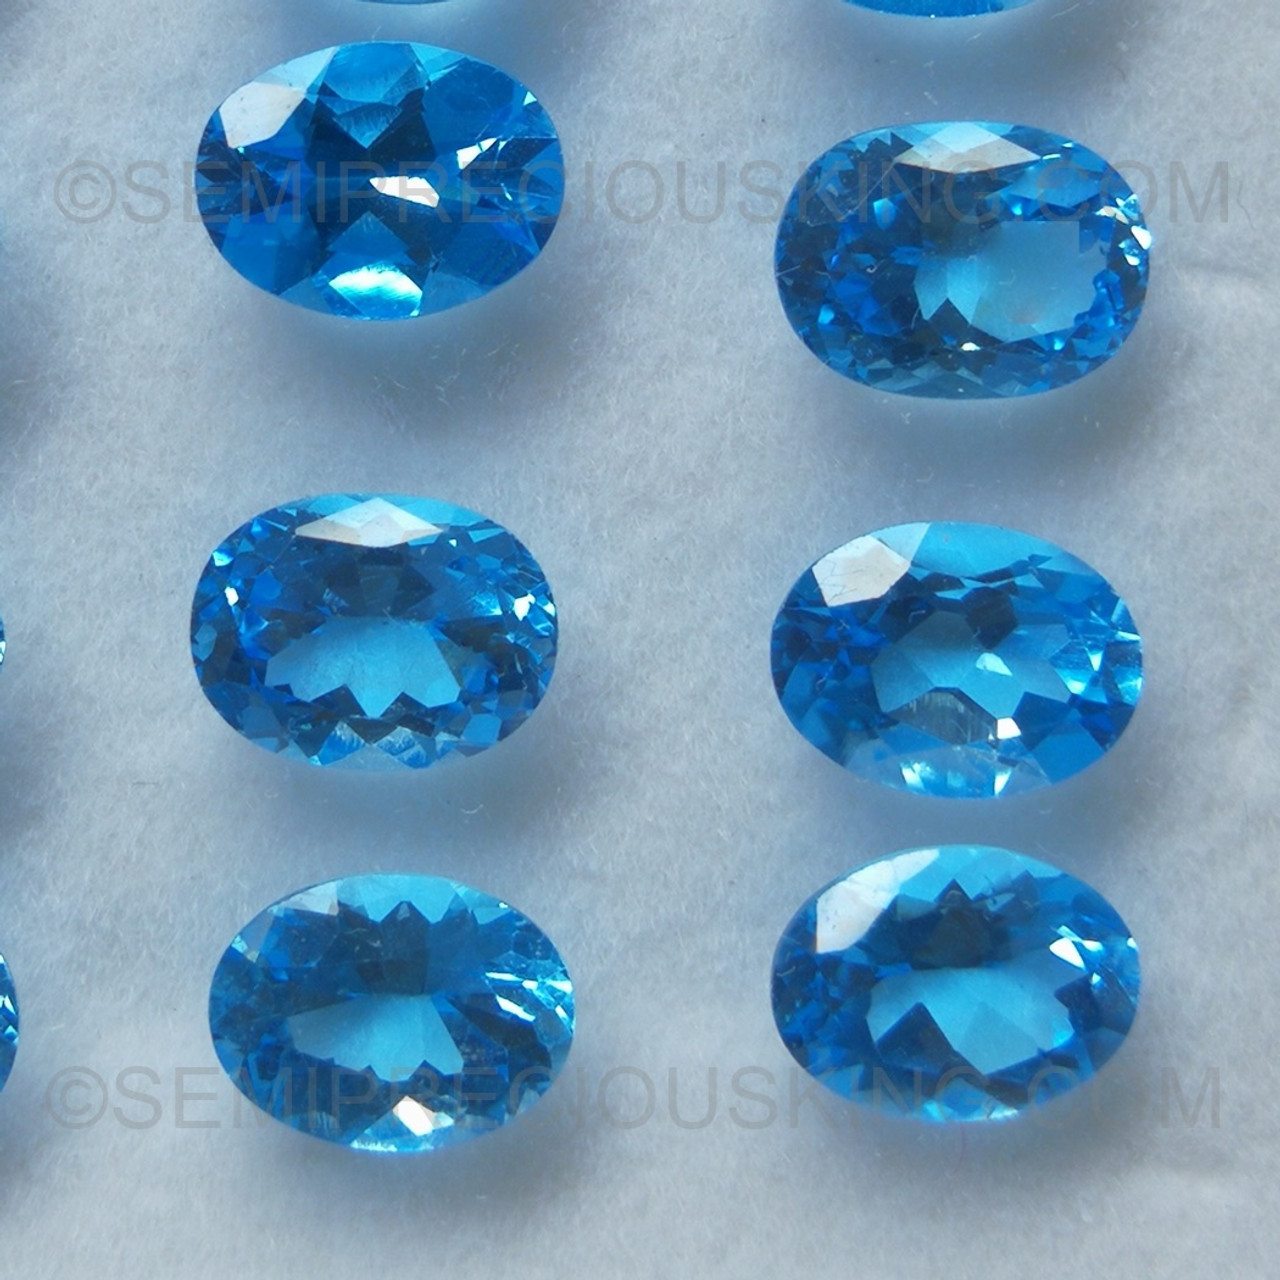 Details about   Natural Top Quality Swiss Blue Topaz Octagon Cut 6X8 MM Loose Gemstone Lot 